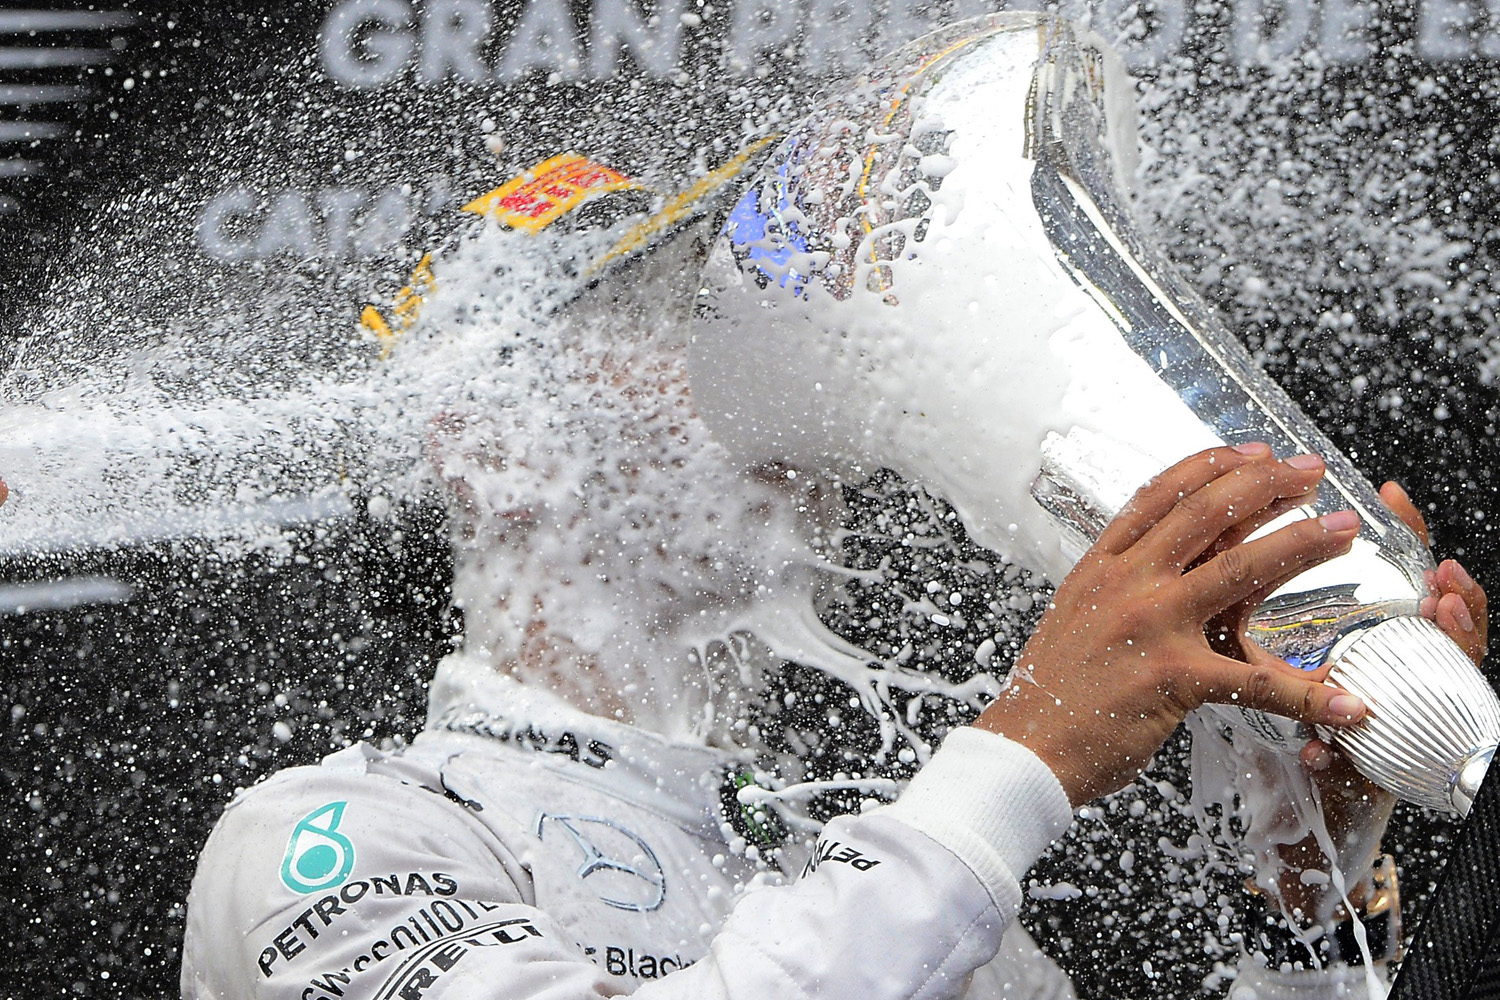 Mercedes driver Lewis Hamilton of Britain celebrates on the podium after winning the Spain Formula One Grand Prix at the Barcelona Catalunya racetrack in Montmelo, near Barcelona, Spain, on May 11, 2014.